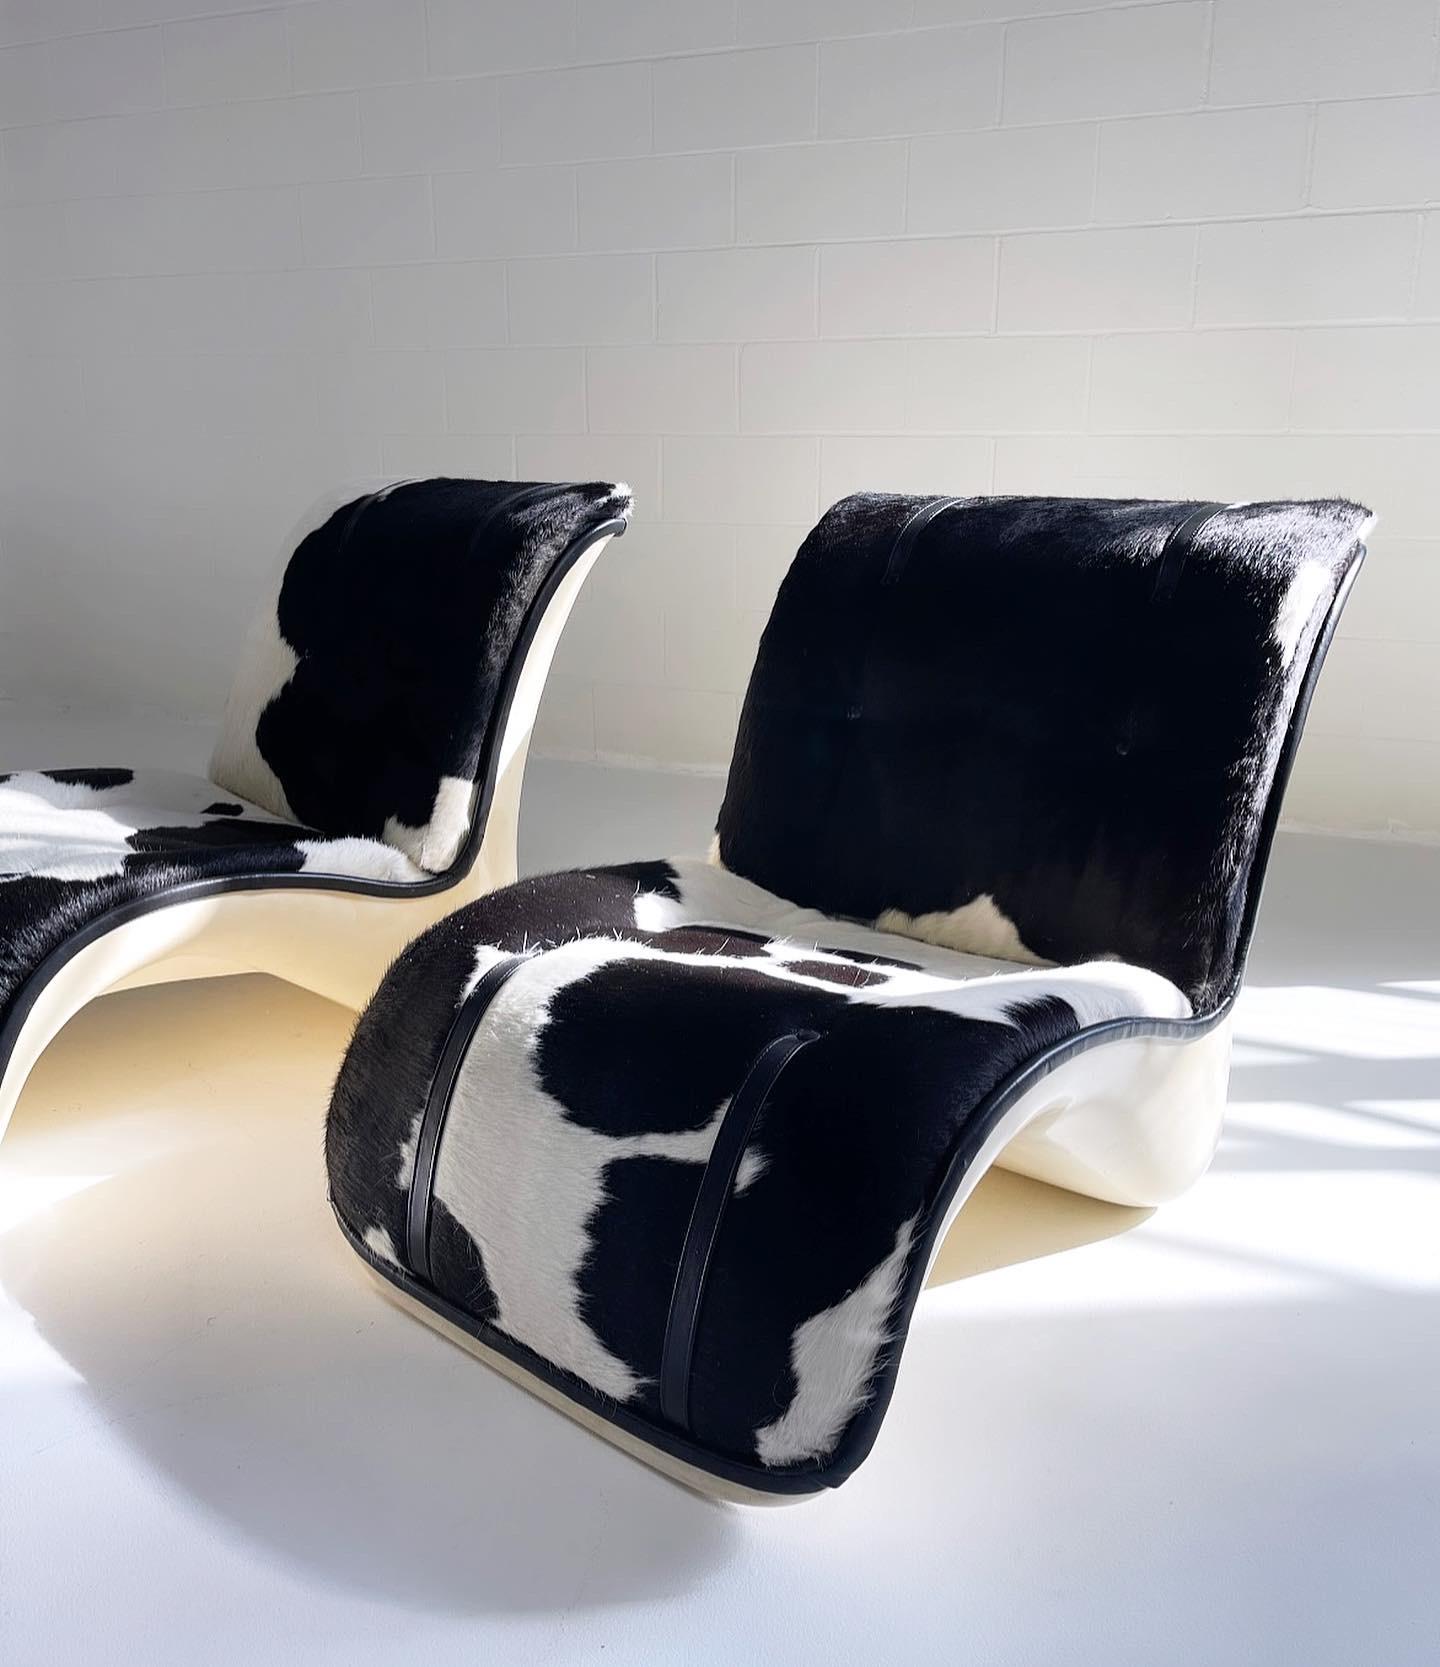 Mid-20th Century Verner Panton Fiberglass Lounge Chairs in Brazilian Cowhide and Leather, Pair For Sale